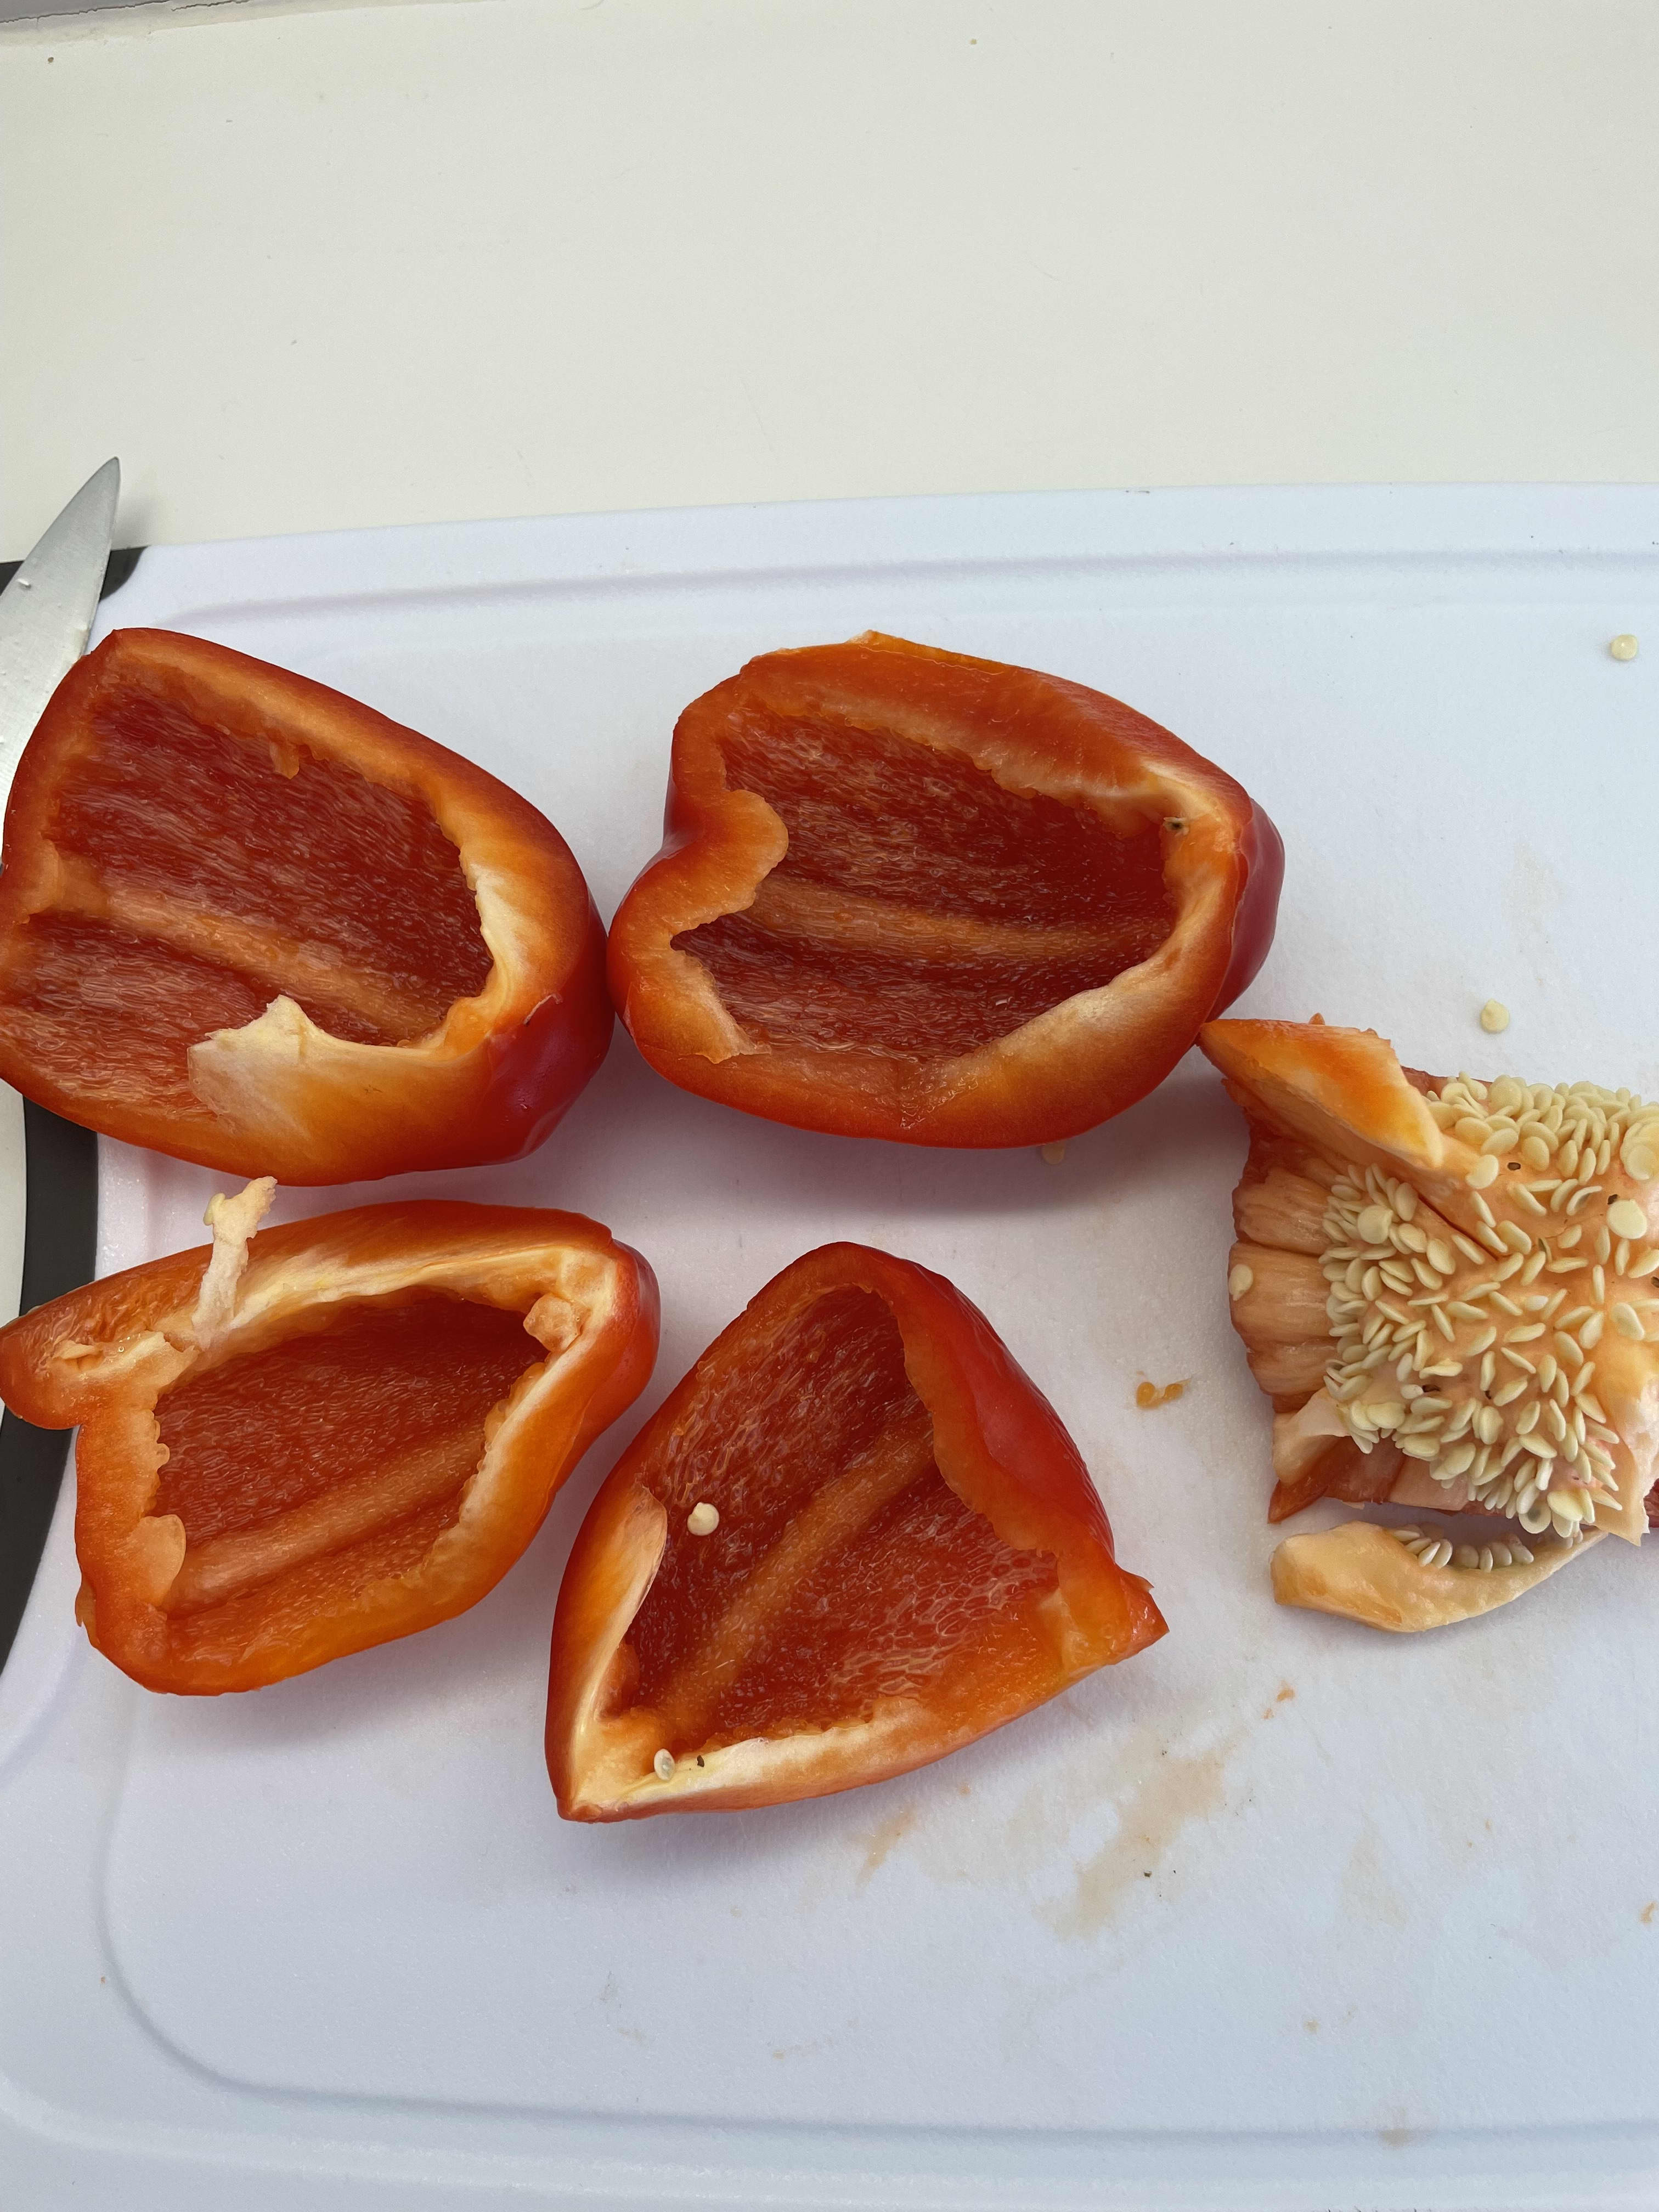 Why You Should Be Cutting Bell Peppers Upside Down